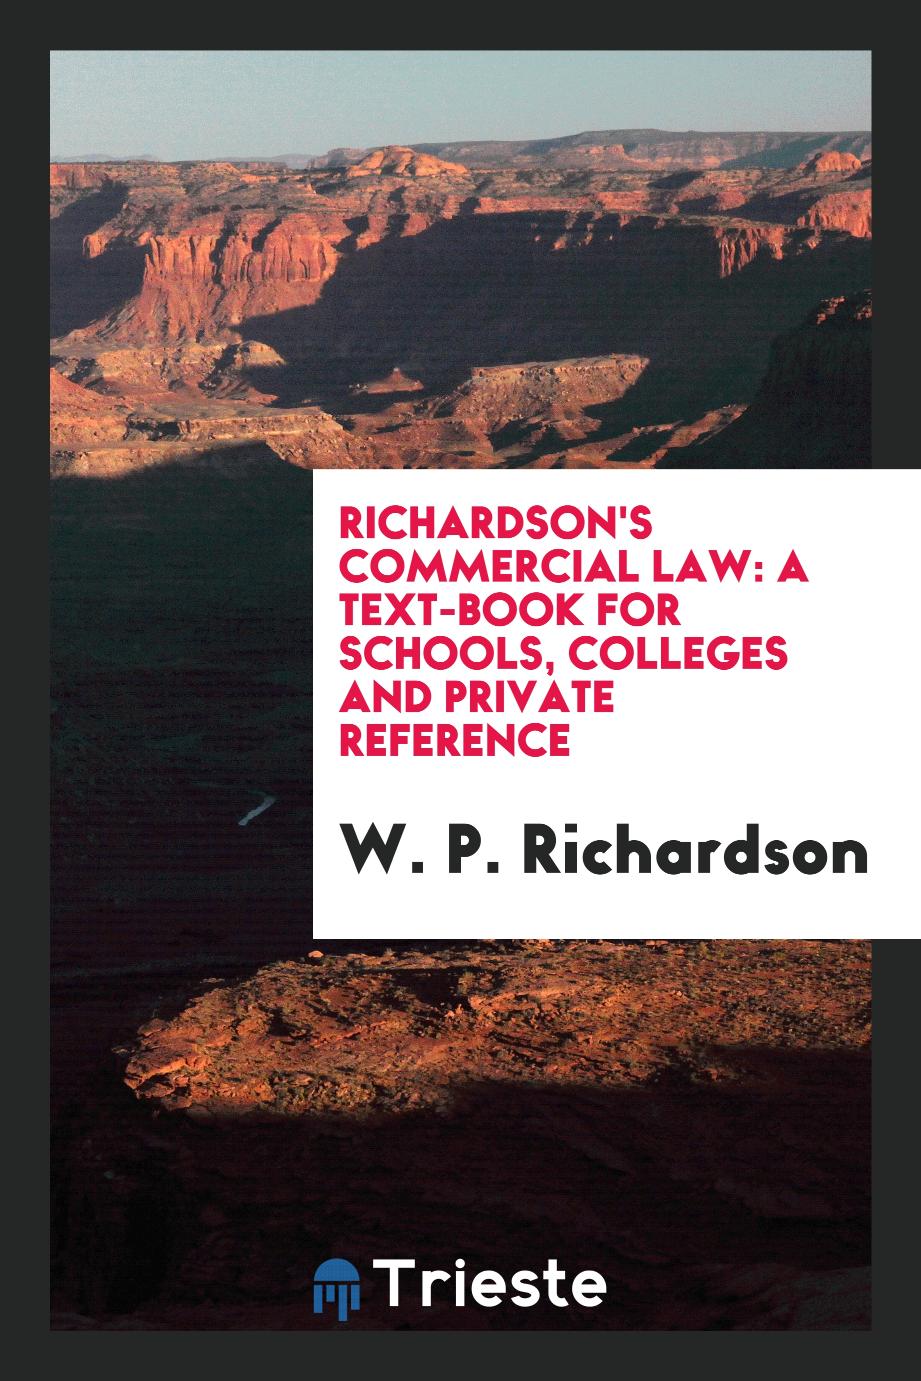 Richardson's Commercial Law: A Text-Book for Schools, Colleges and Private Reference